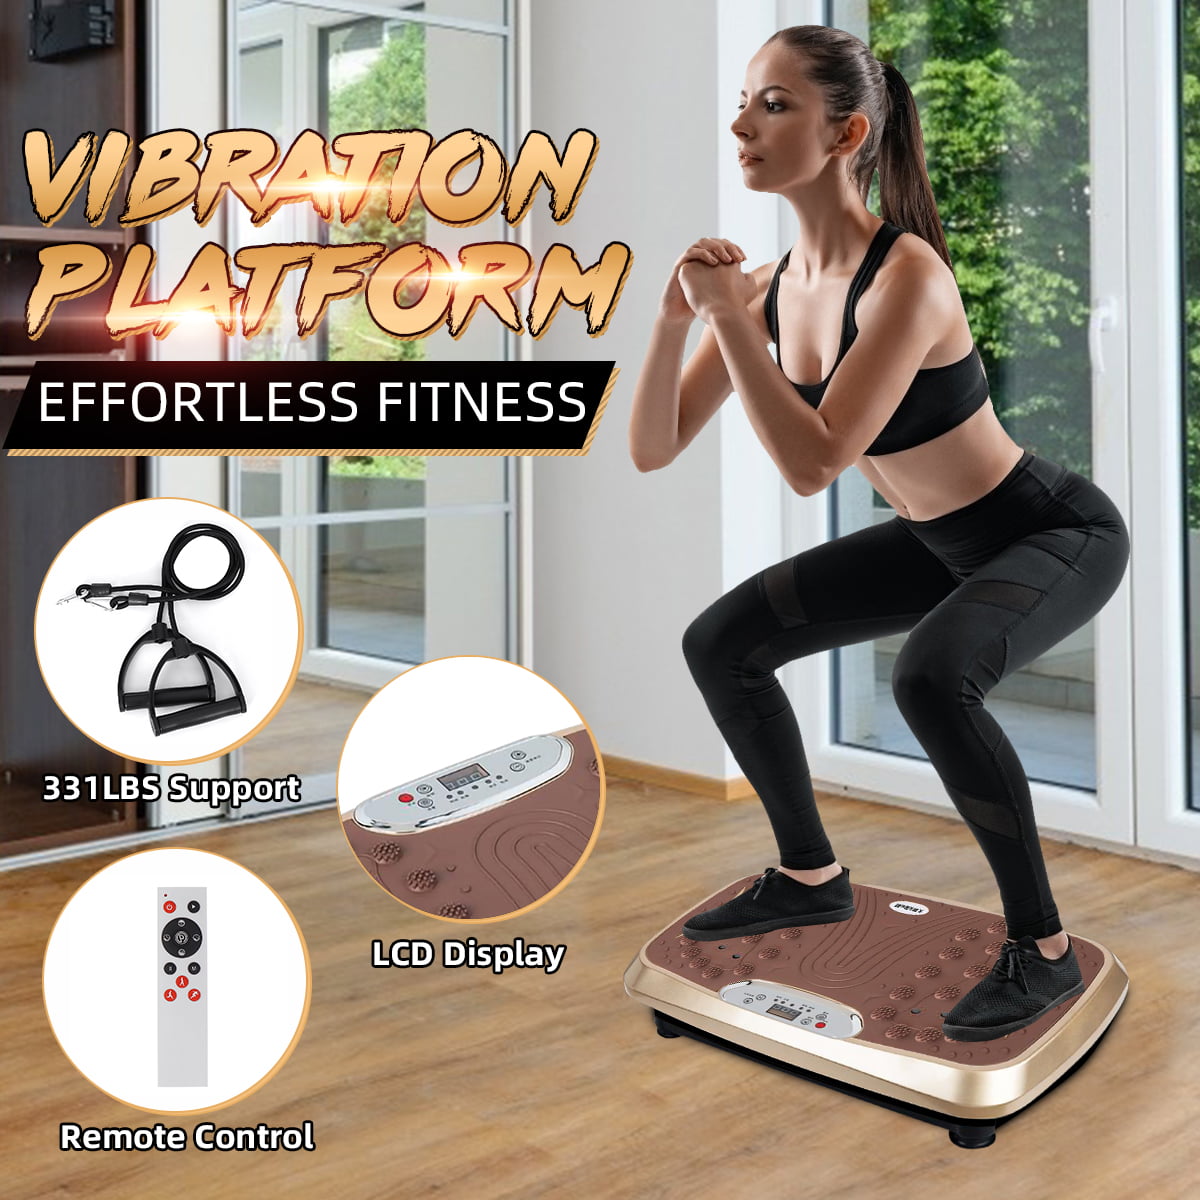 Vibration Plate Exercise Machine with Bluetooth Speaker 99 Levels & 10 Modes Whole Body Shape Vibration Platform Machine with Jump Rope for Weight Loss Fitness Home Gym Equipment Workout Machine 